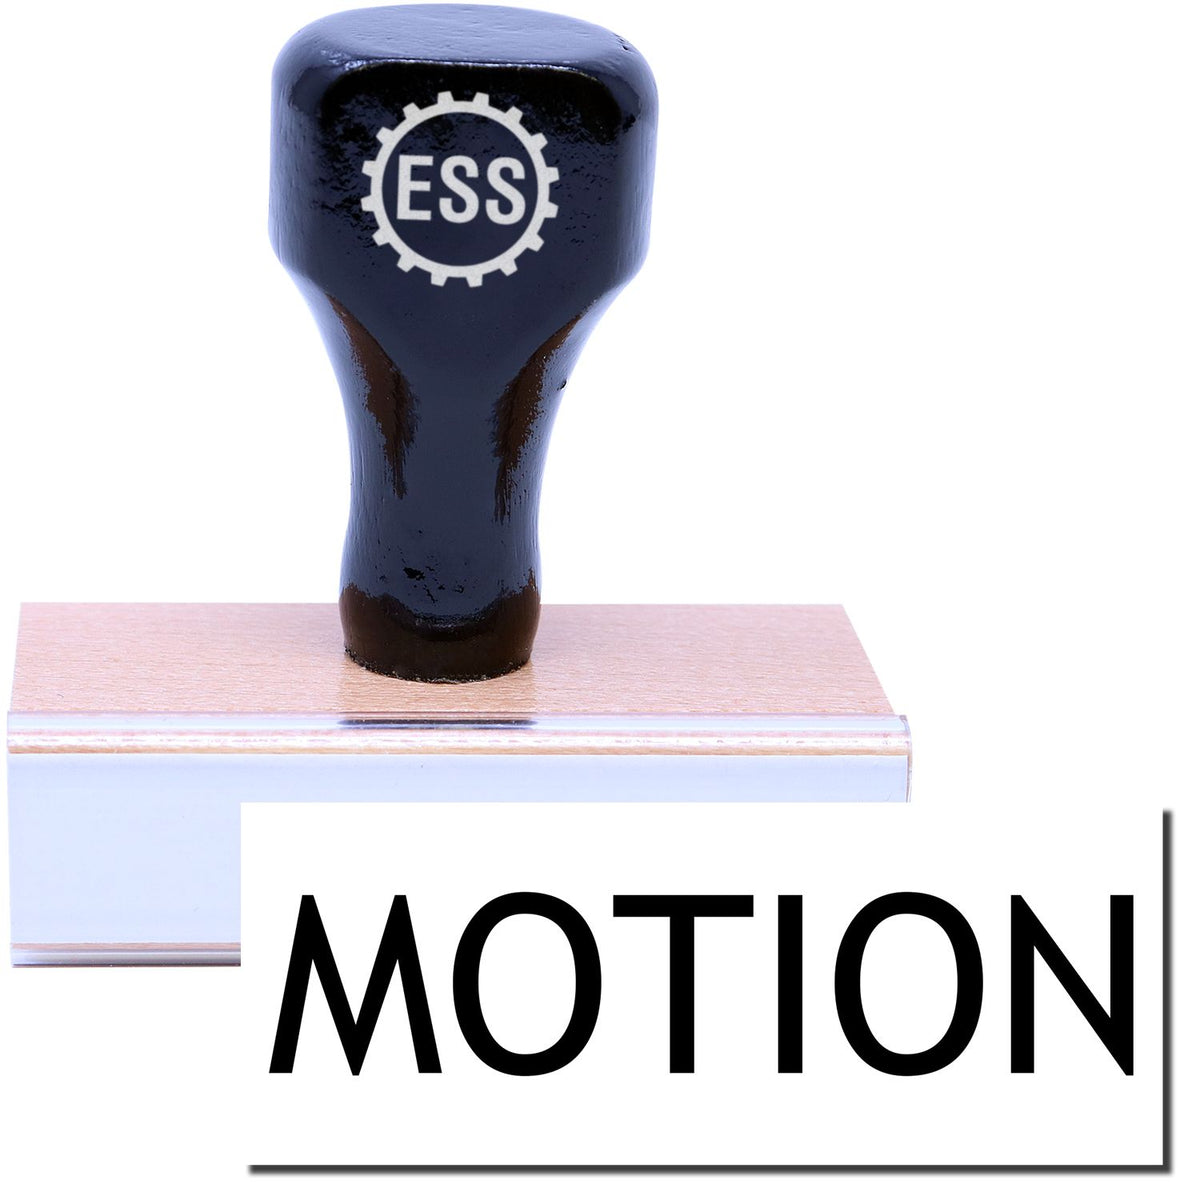 A stock office rubber stamp with a stamped image showing how the text &quot;MOTION&quot; in a large font is displayed after stamping.